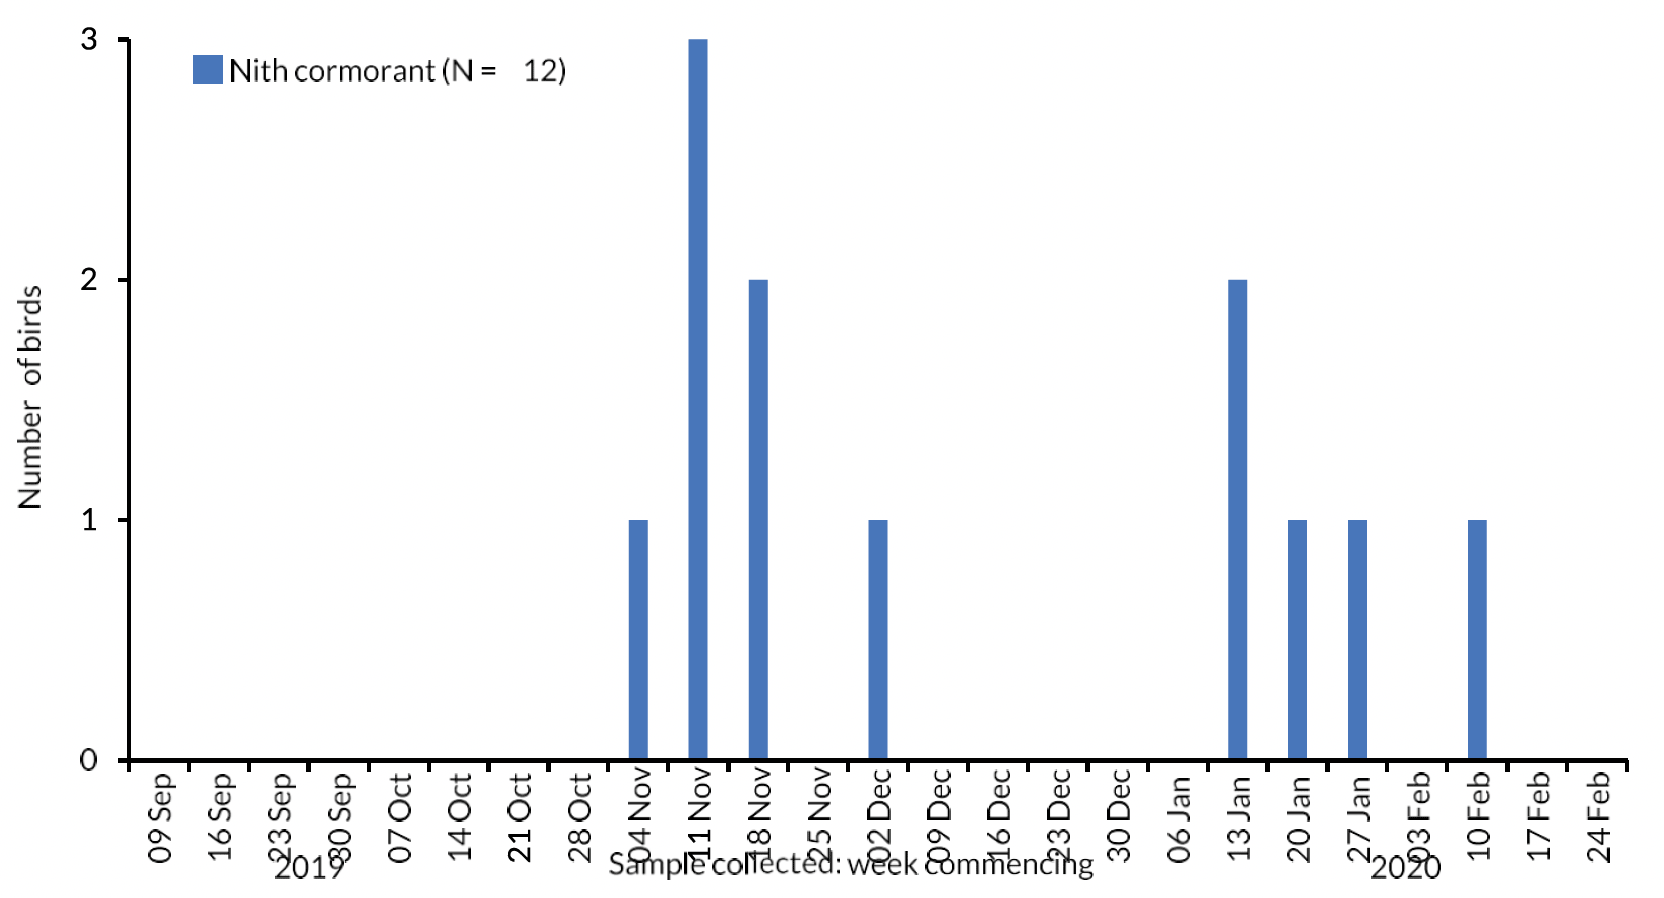 Bar chart of the number of River Nith Cormorants collected each week during the autumn-winter period 2019/20.